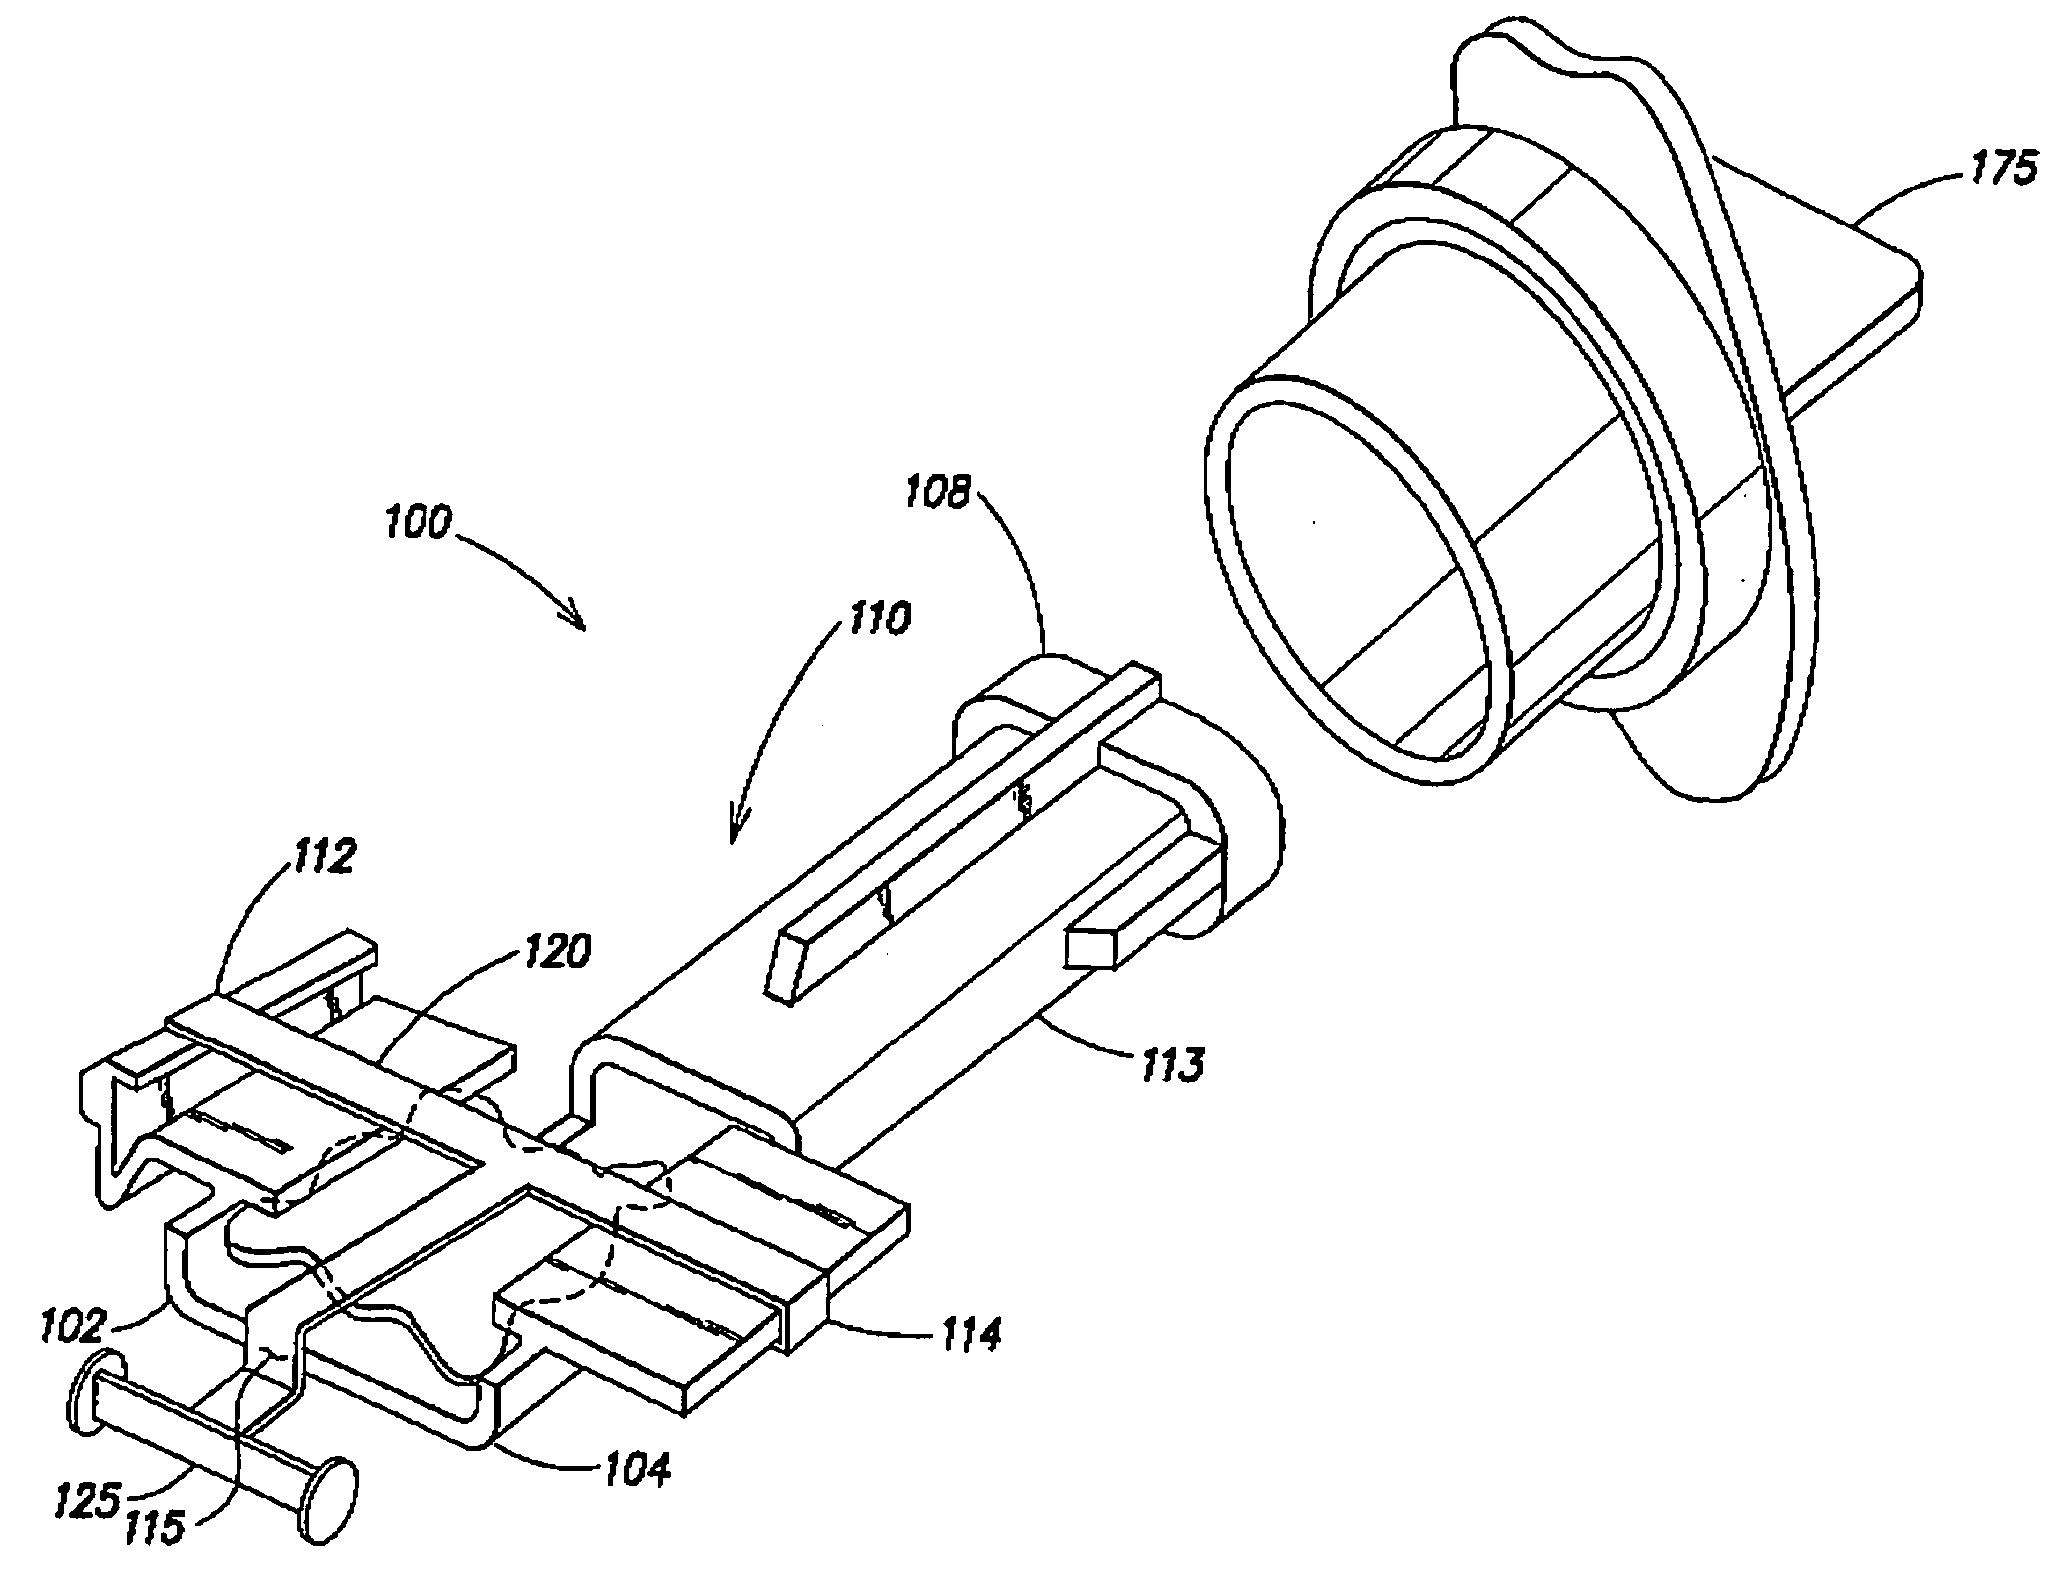 Intraocular lens injector subassembly